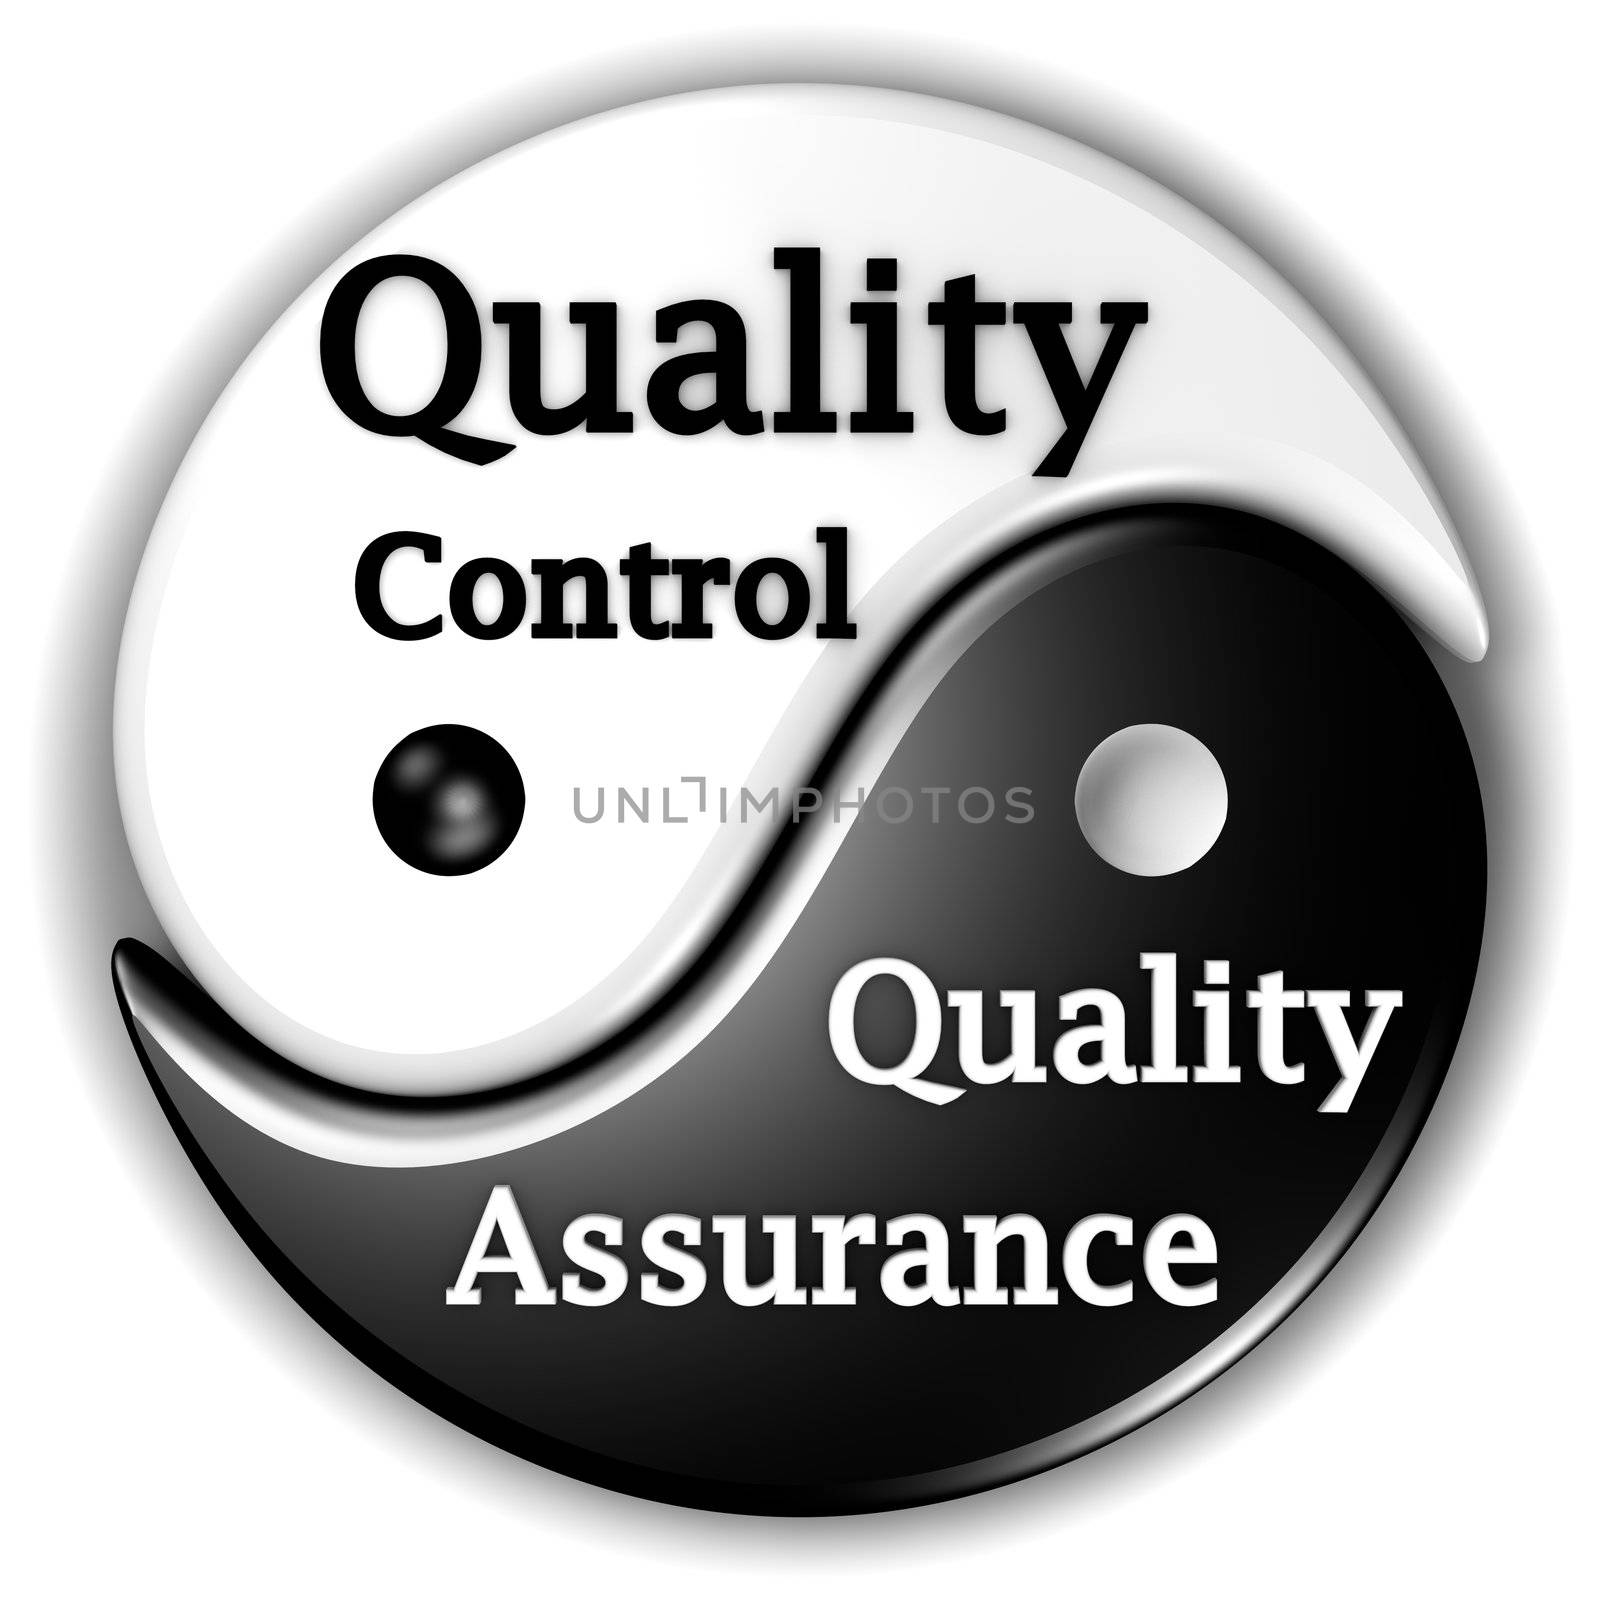 Quality assurance and Quality Control, like Ying and Yang, are inseparables